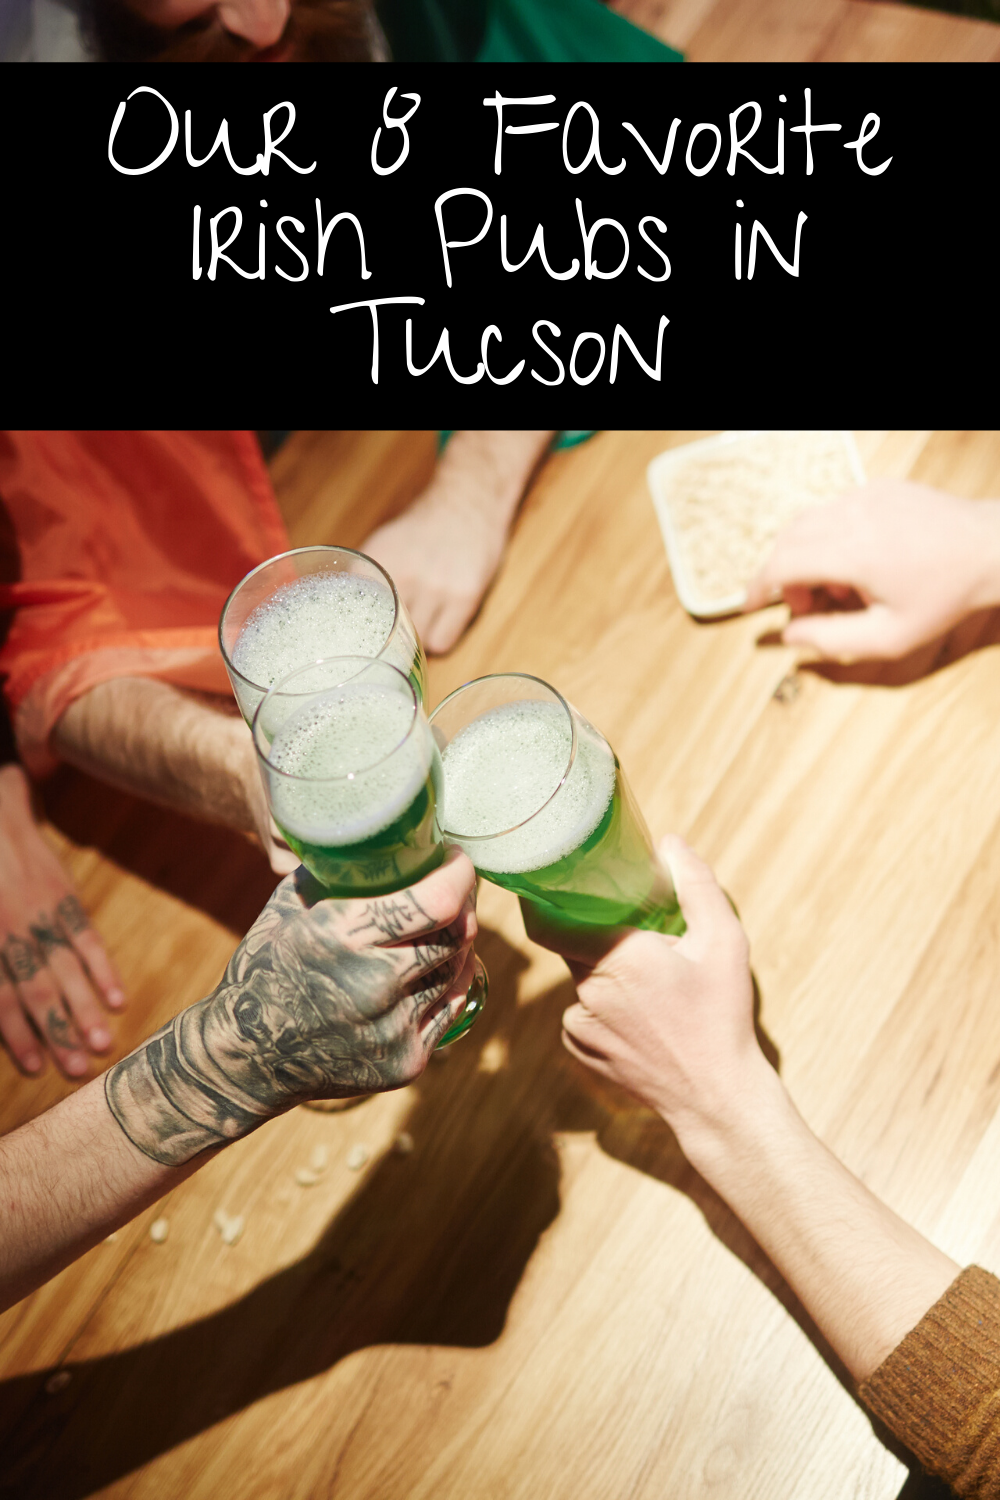 When it comes time to celebrate St. Patrick's day in Tucson you can't go wrong with these Irish pubs in Tucson. They'll give you all the Irish festivities you could want as you celebrate this fun holiday.